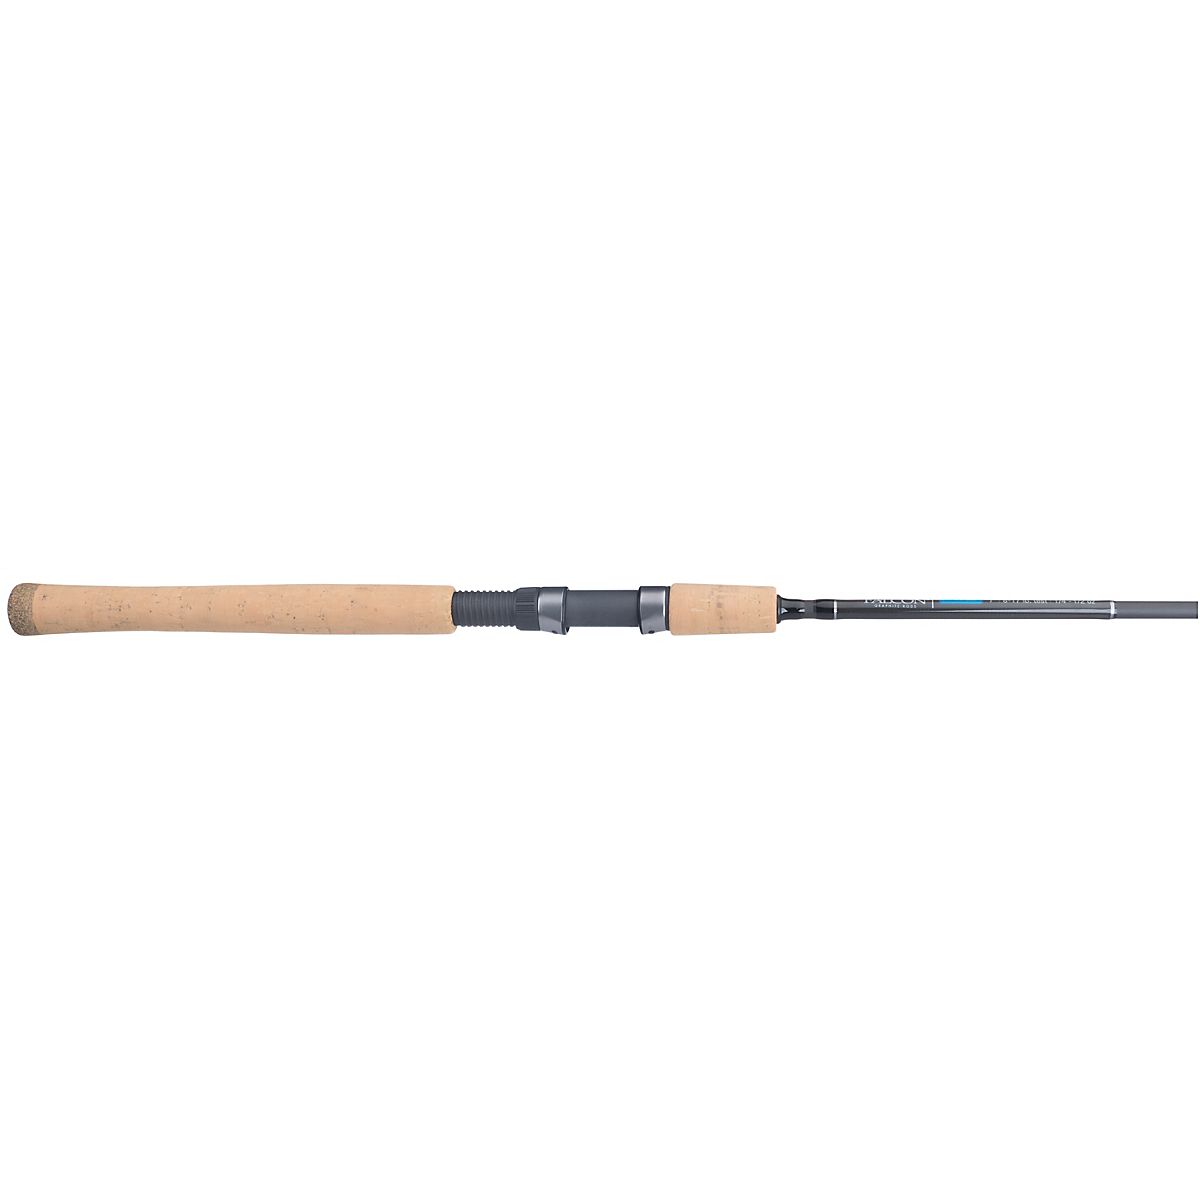 Academy Sports + Outdoors Falcon HD 7' Freshwater/Saltwater Spinning Rod